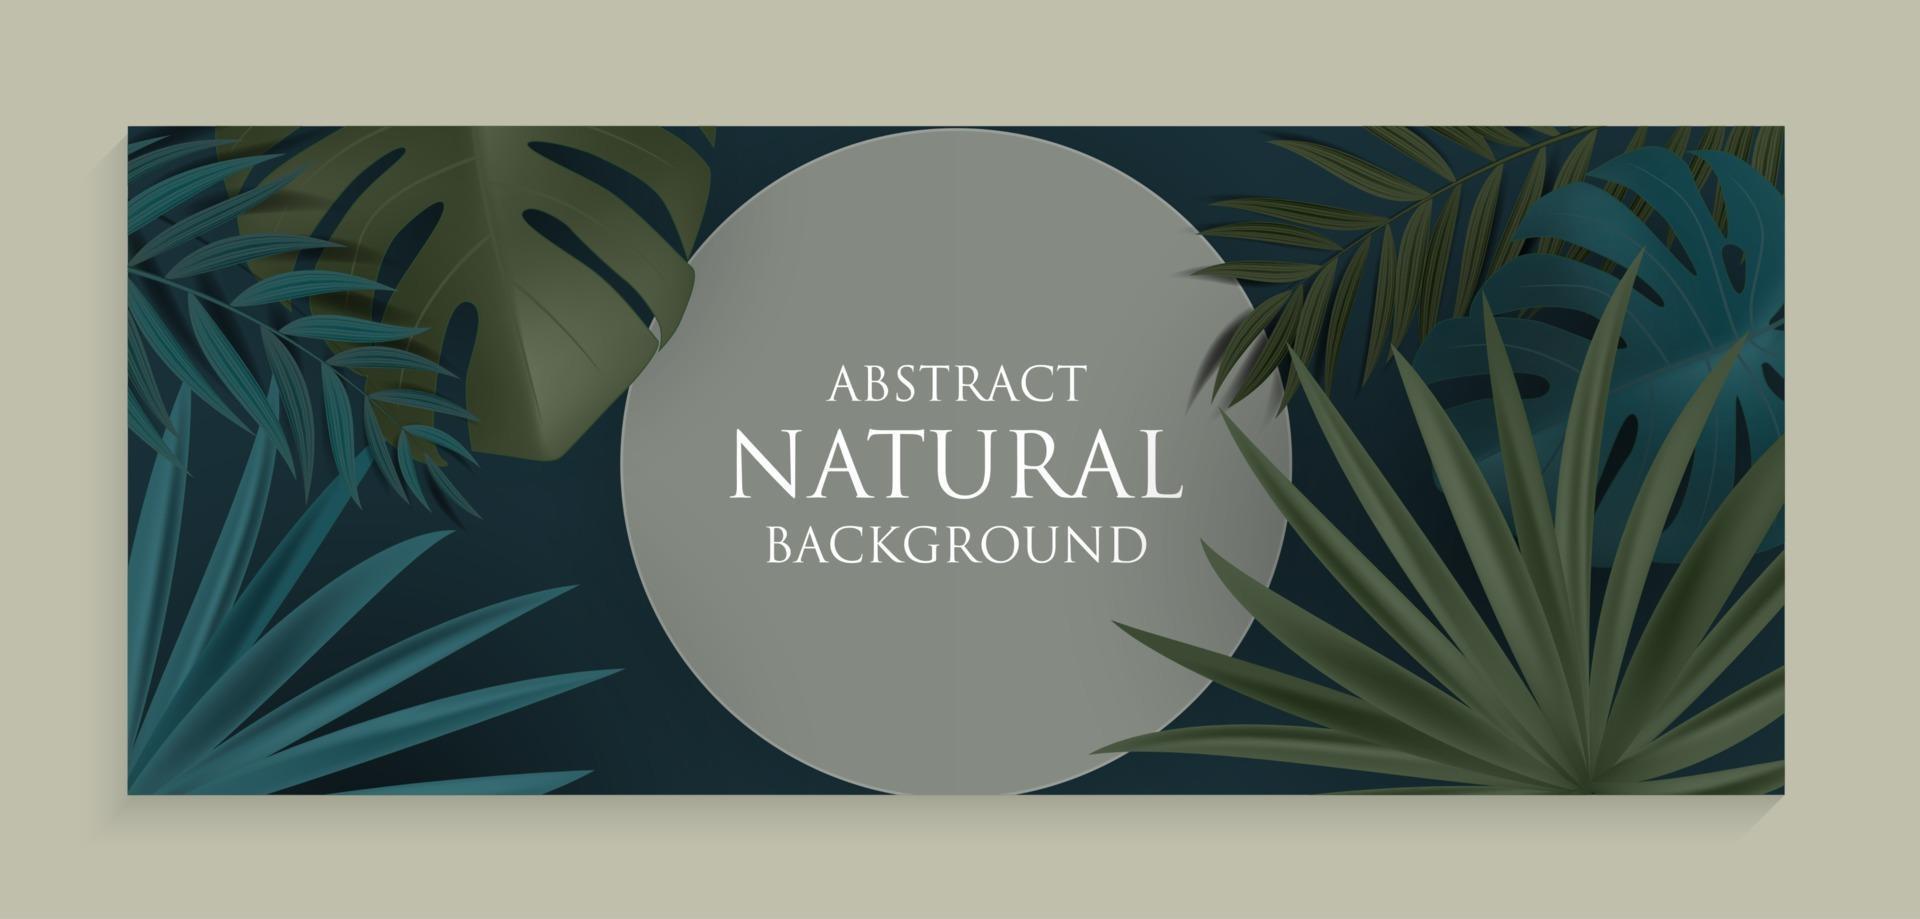 Abstract Natural Background with Tropical Palm and Monstera Leaves. Vector Illustration EPS10